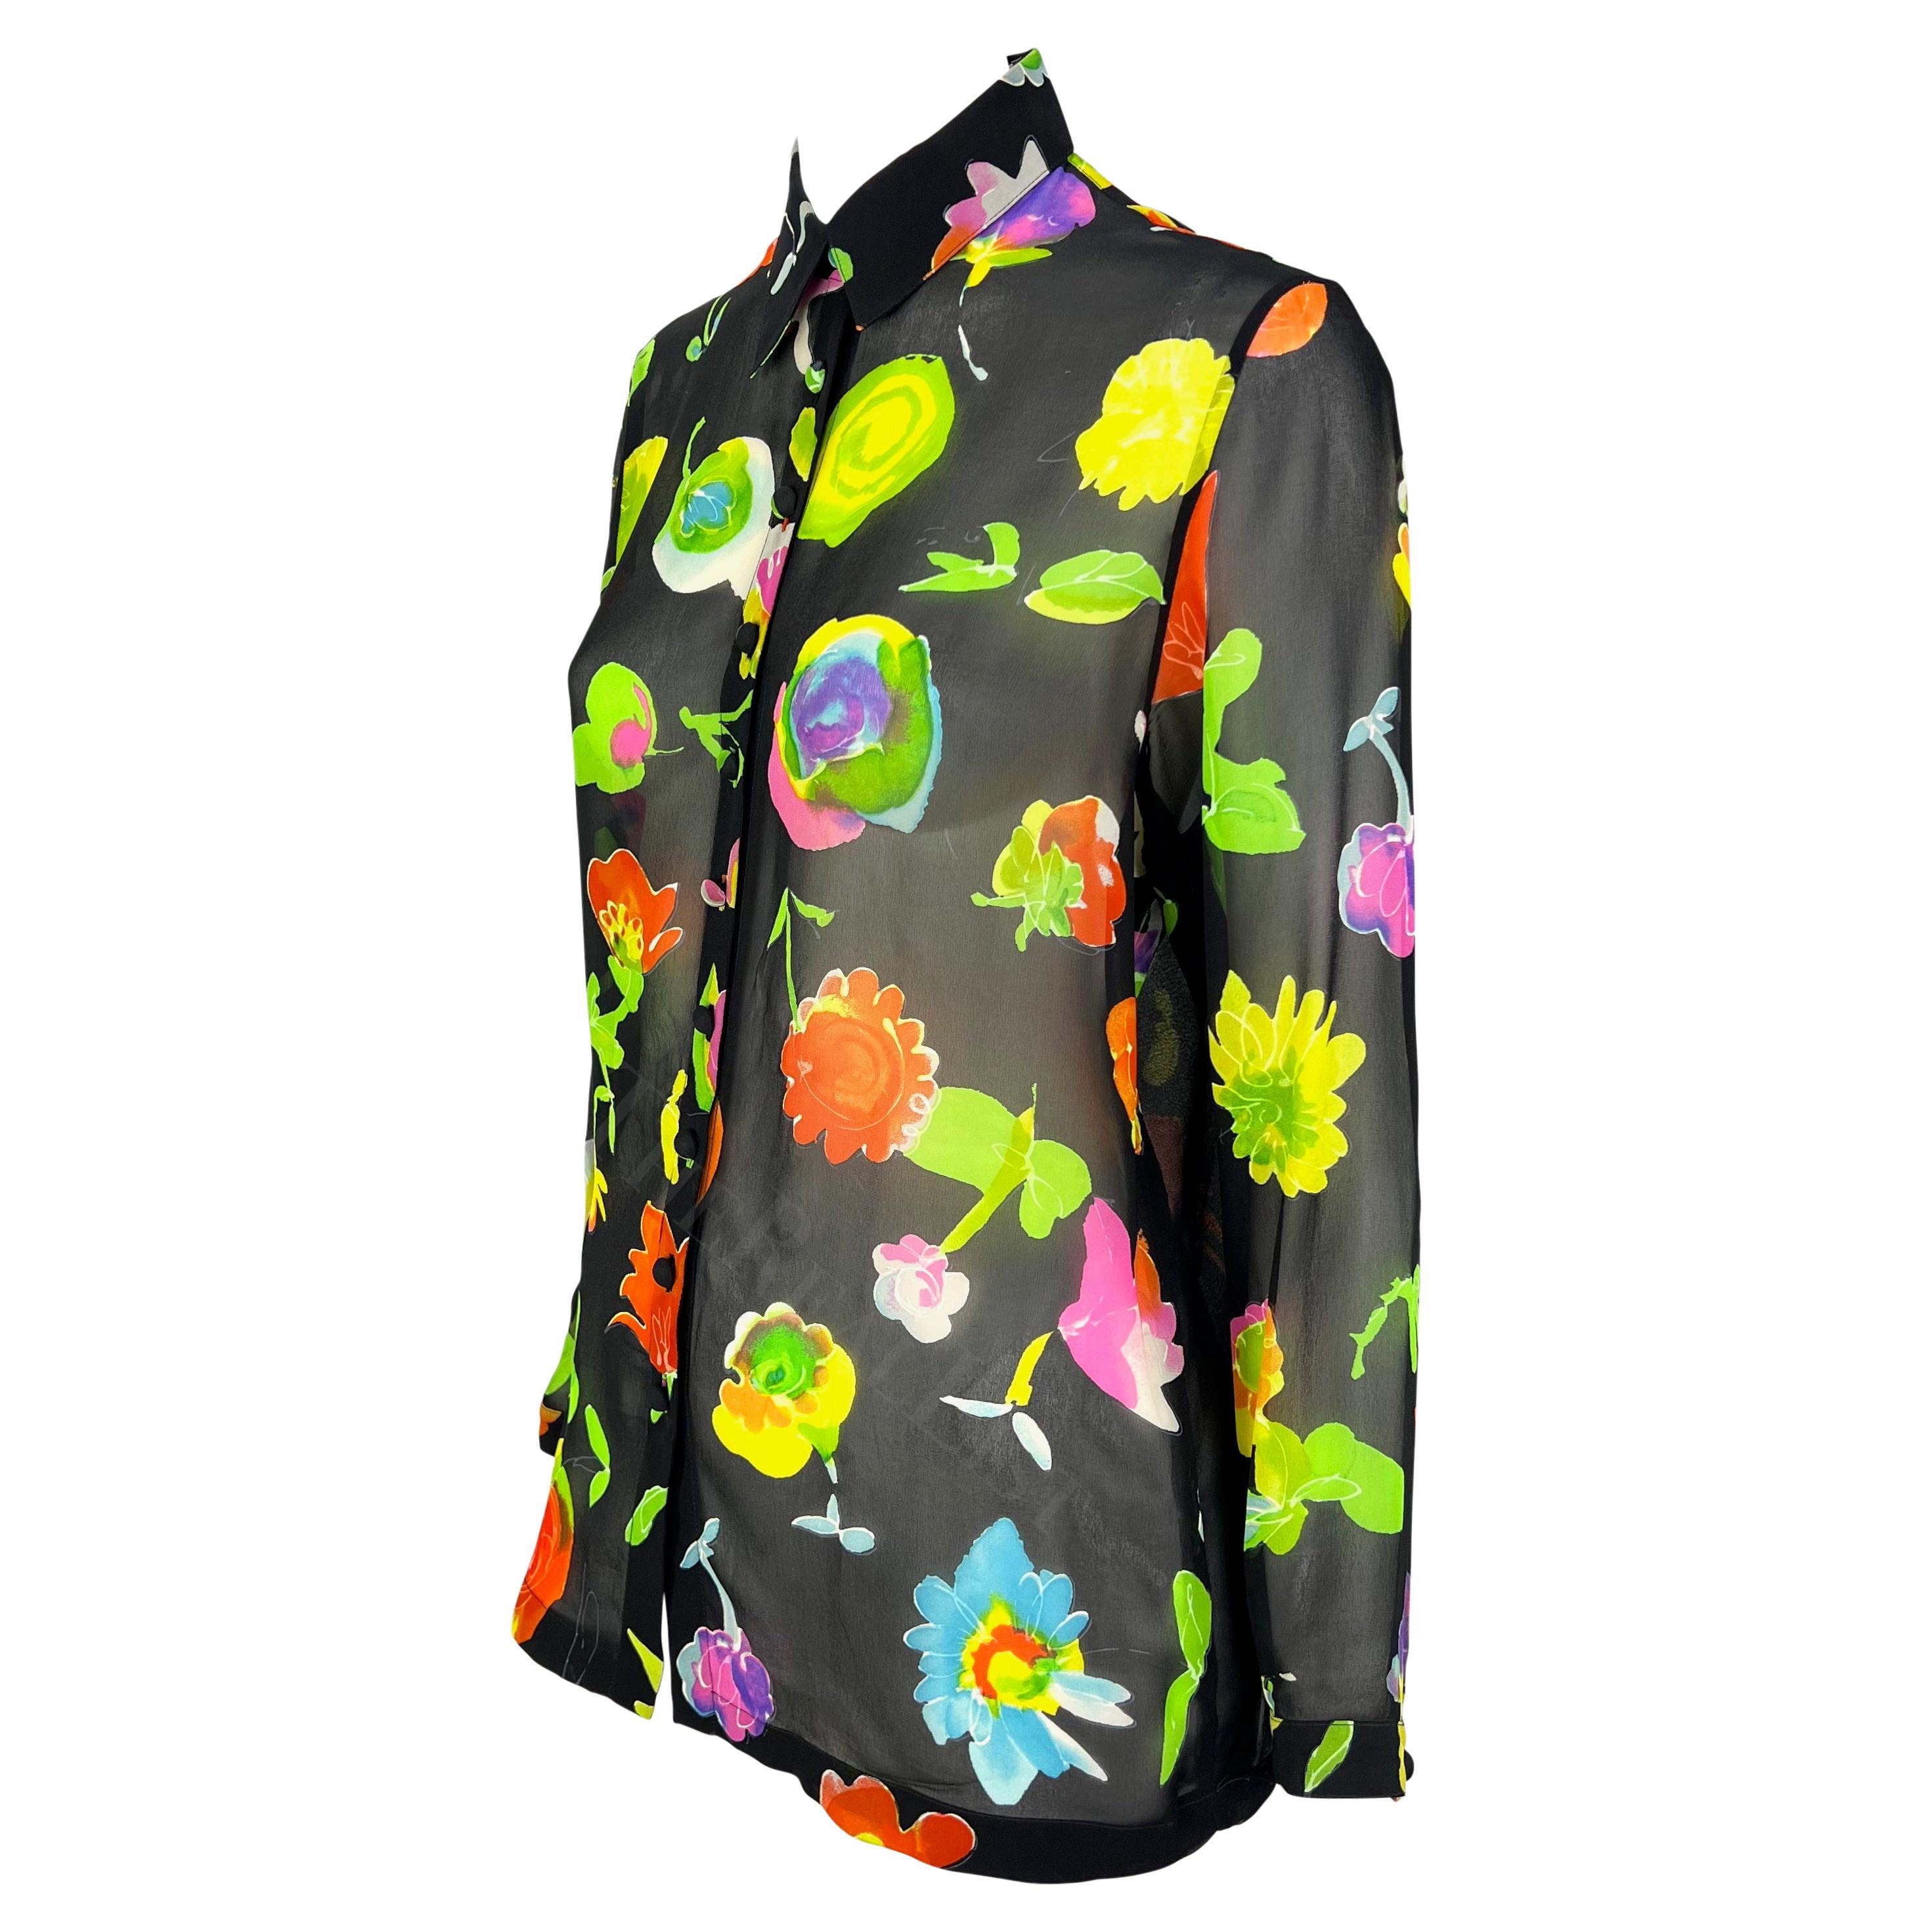 Presenting a fabulous black floral sheer Gianni Versace button-down shirt, designed by Gianni Versace. From the Spring/Summer 1996 collection, similar prints were heavily used on the season's runway. This loose-fitting top is  semi-sheer with a